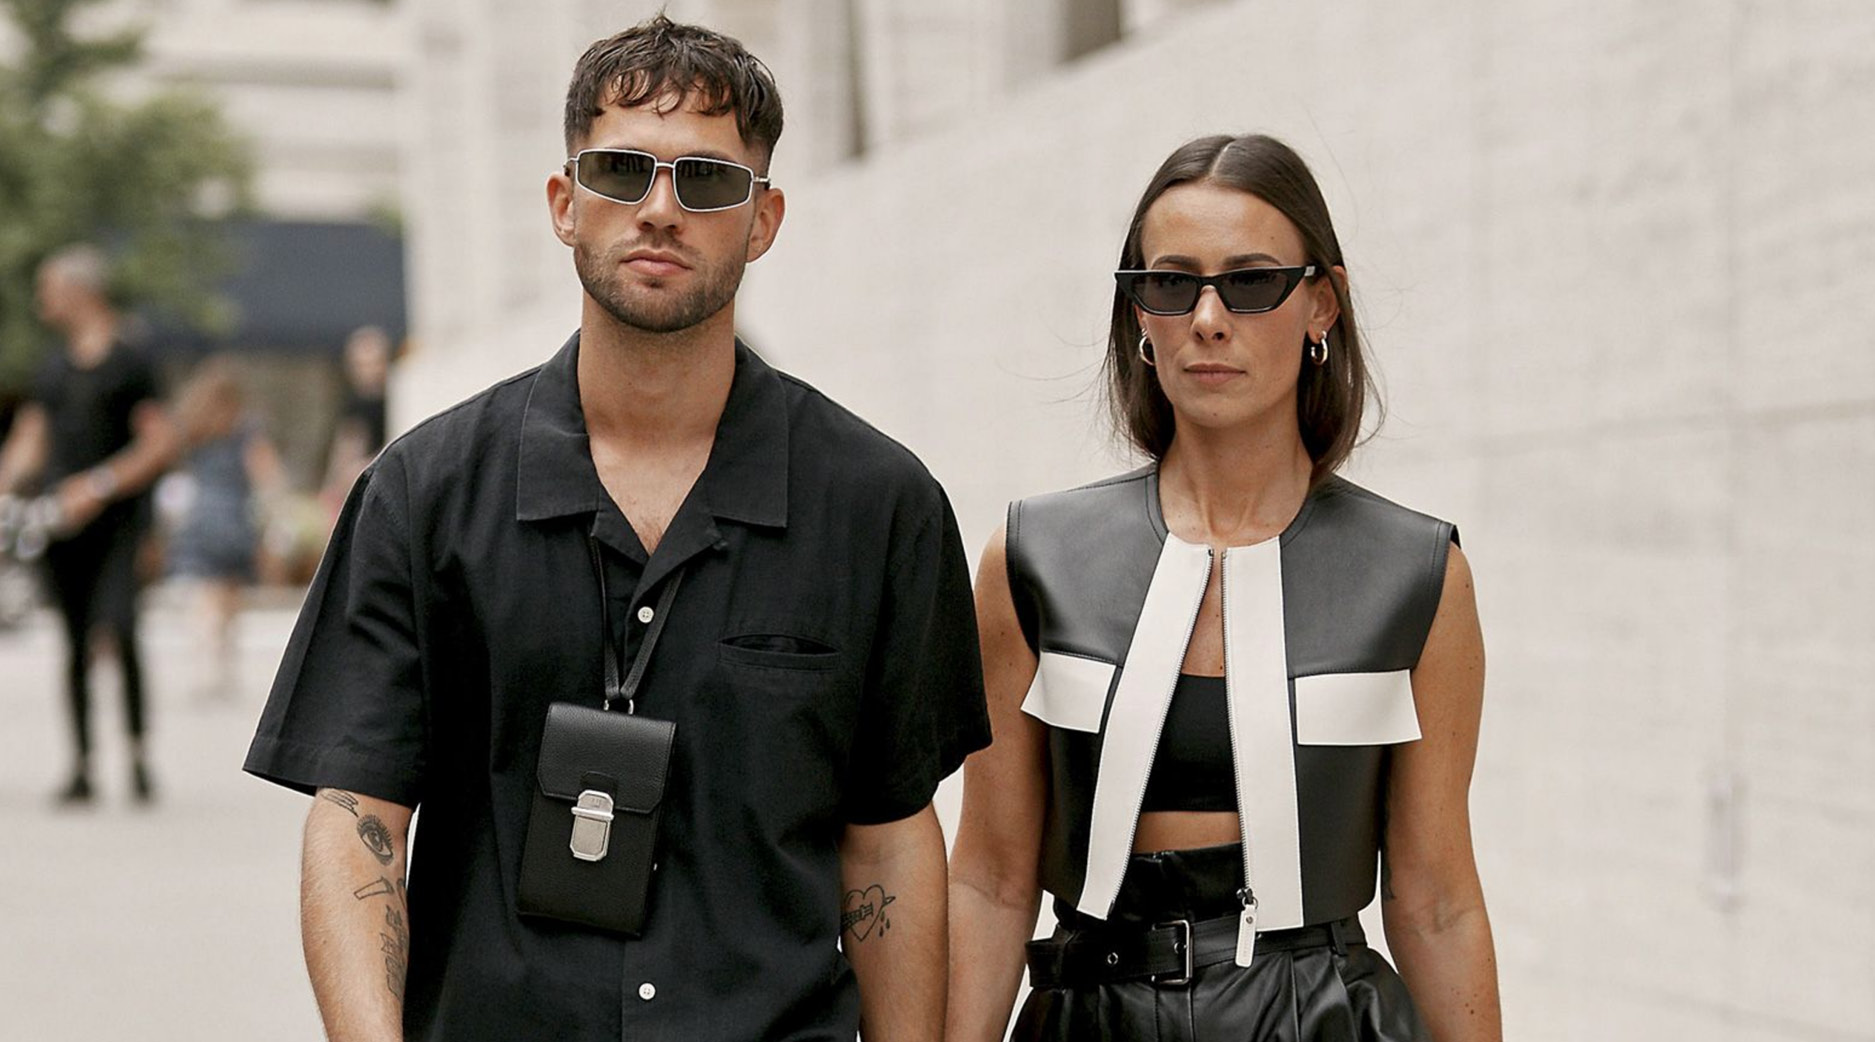 Give your shades an upgrade with these sleek new sunglasses to